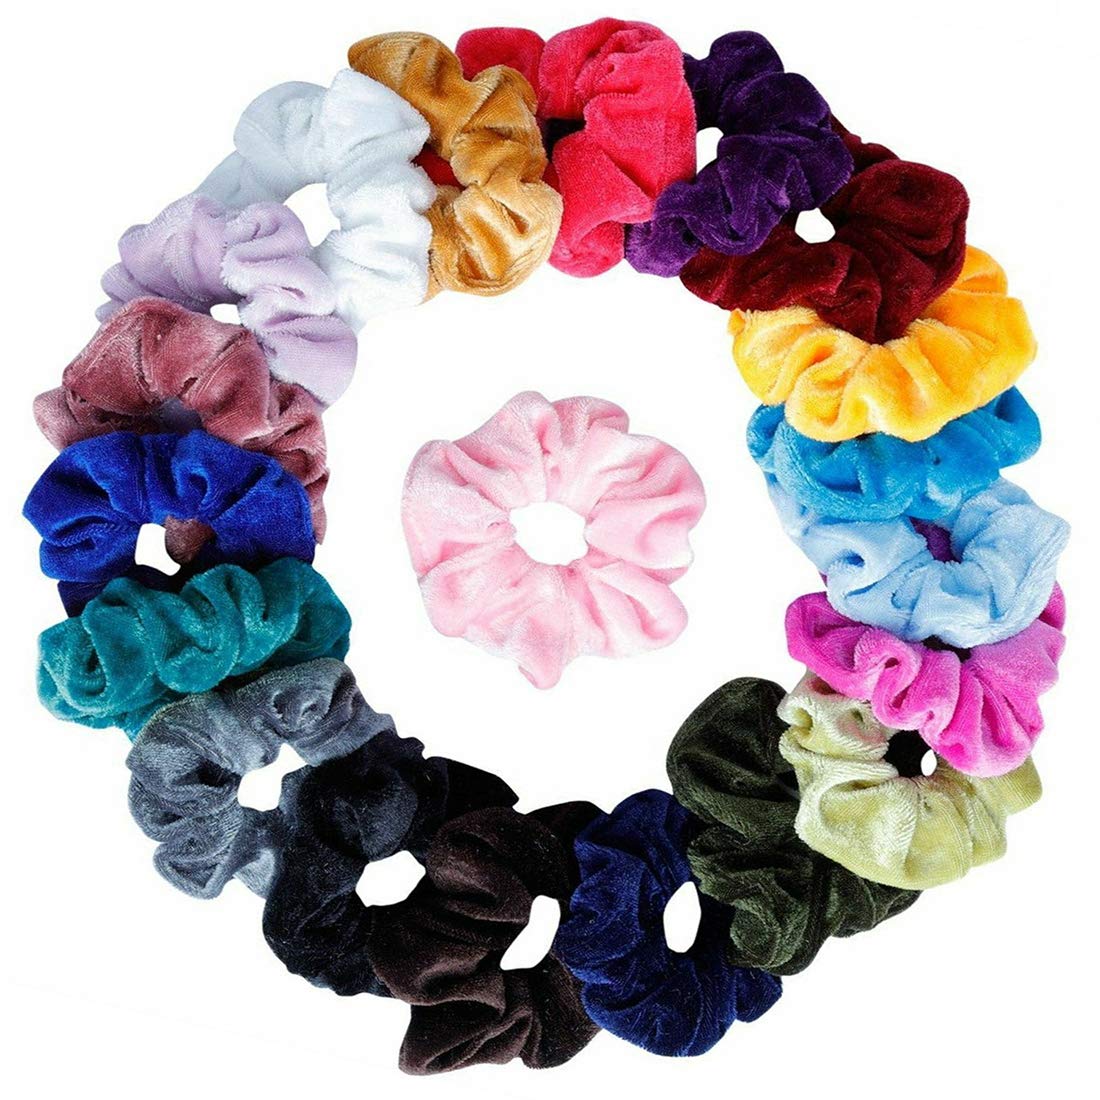 Syolee 20 Pcs Hair Scrunchies Colorful Velvet Elastic Hair Ties Scrunchy Bobbles Ponytail Holder Bands for Women Girls Hair Accessories